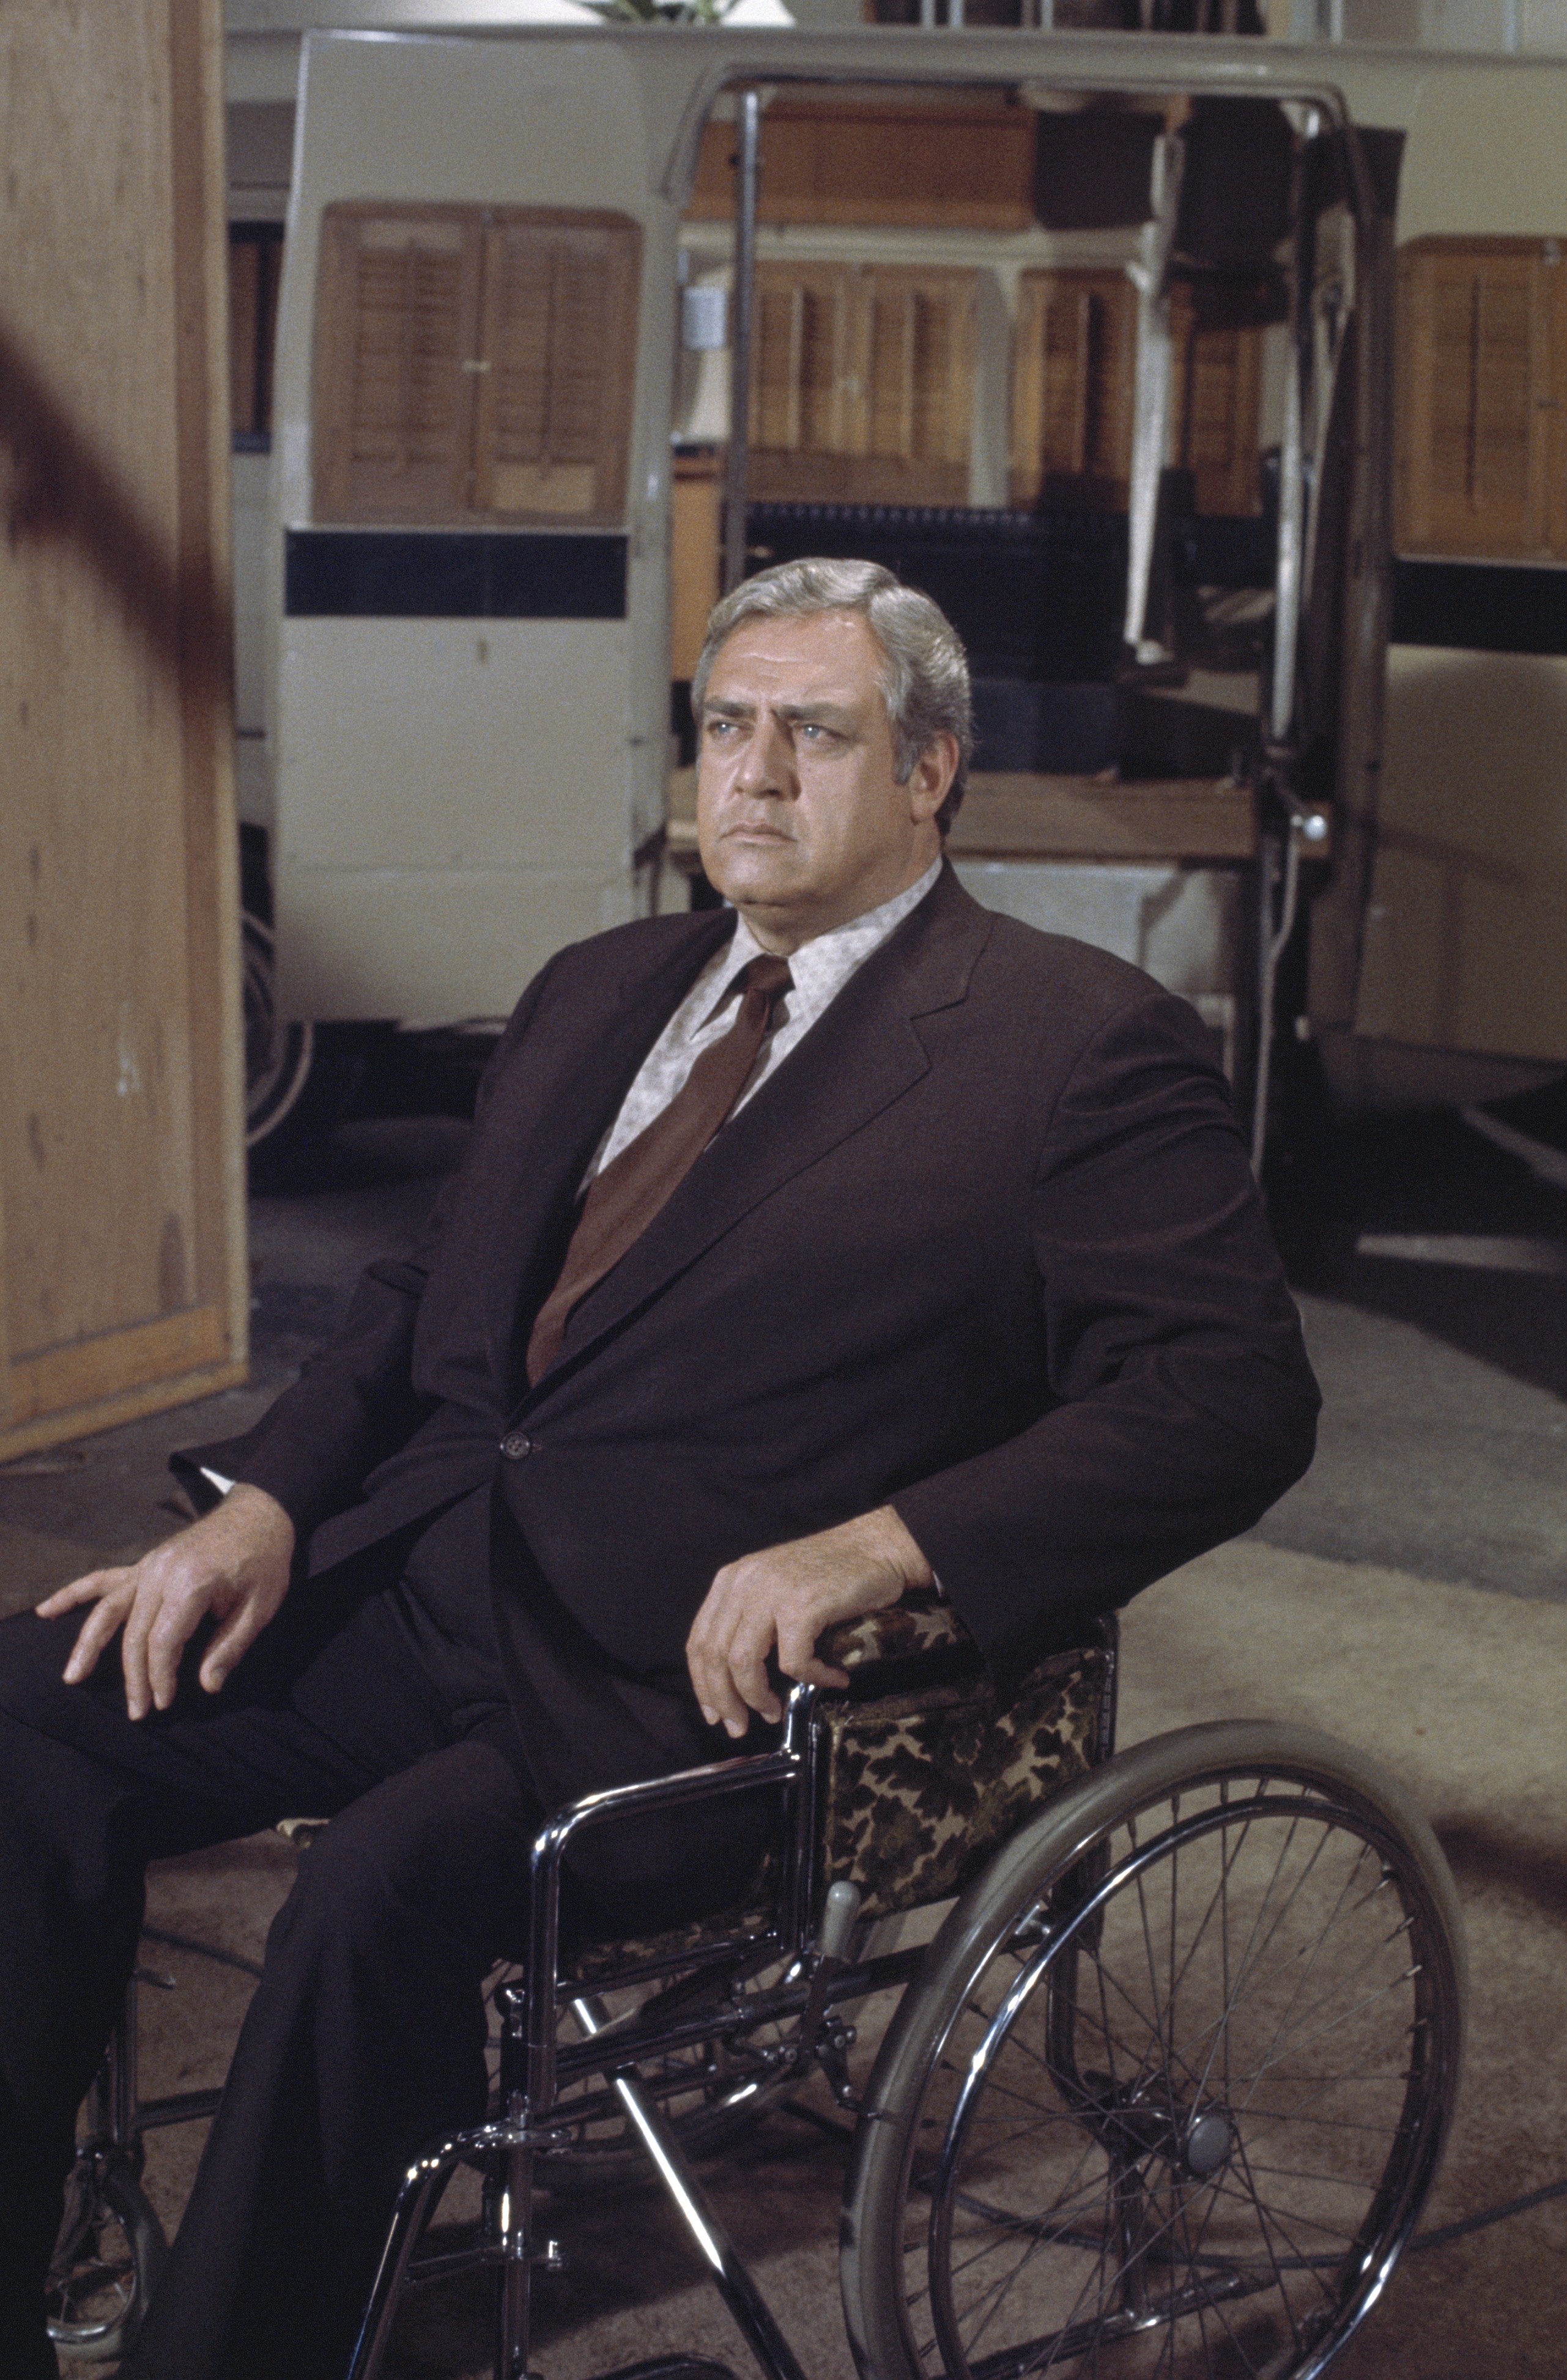 Raymond Burr pictured in a wheelchair as Robert T. Ironside on the television show, "Ironside." | Source: Getty Images